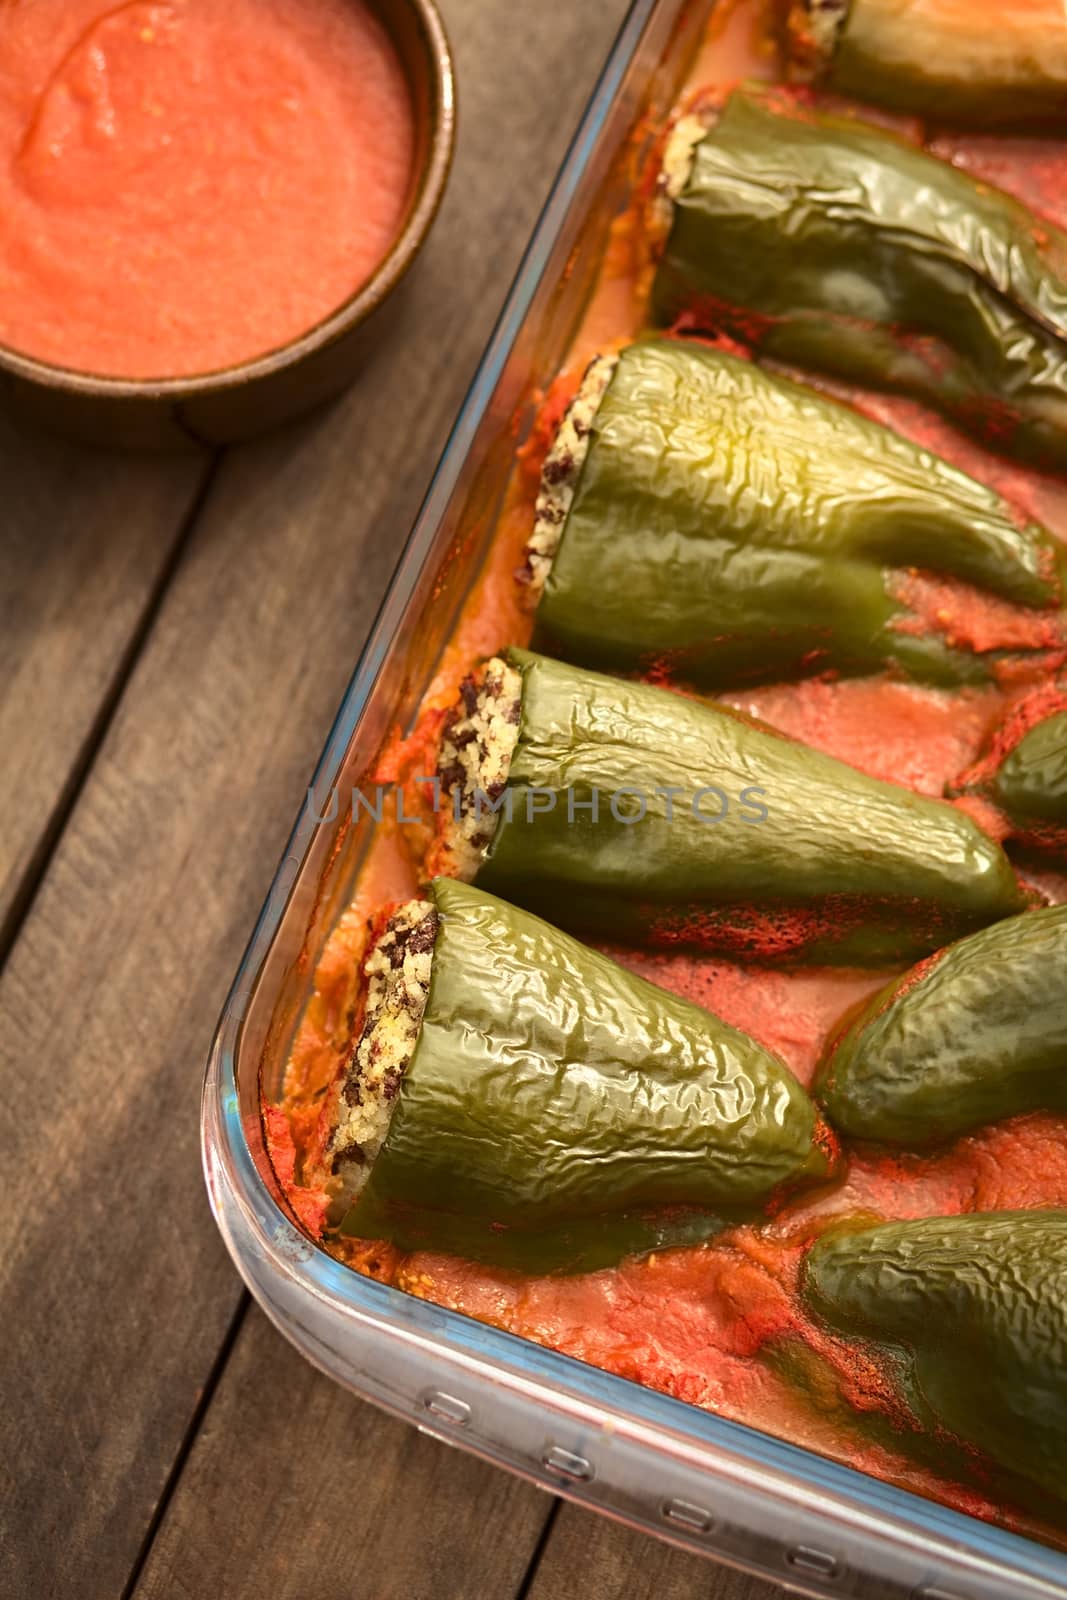 Hungarian baked pepper filled with mincemeat and rice eaten with tomato sauce (Selective Focus, Focus on the top of the filled peppers on the bottom of the image)